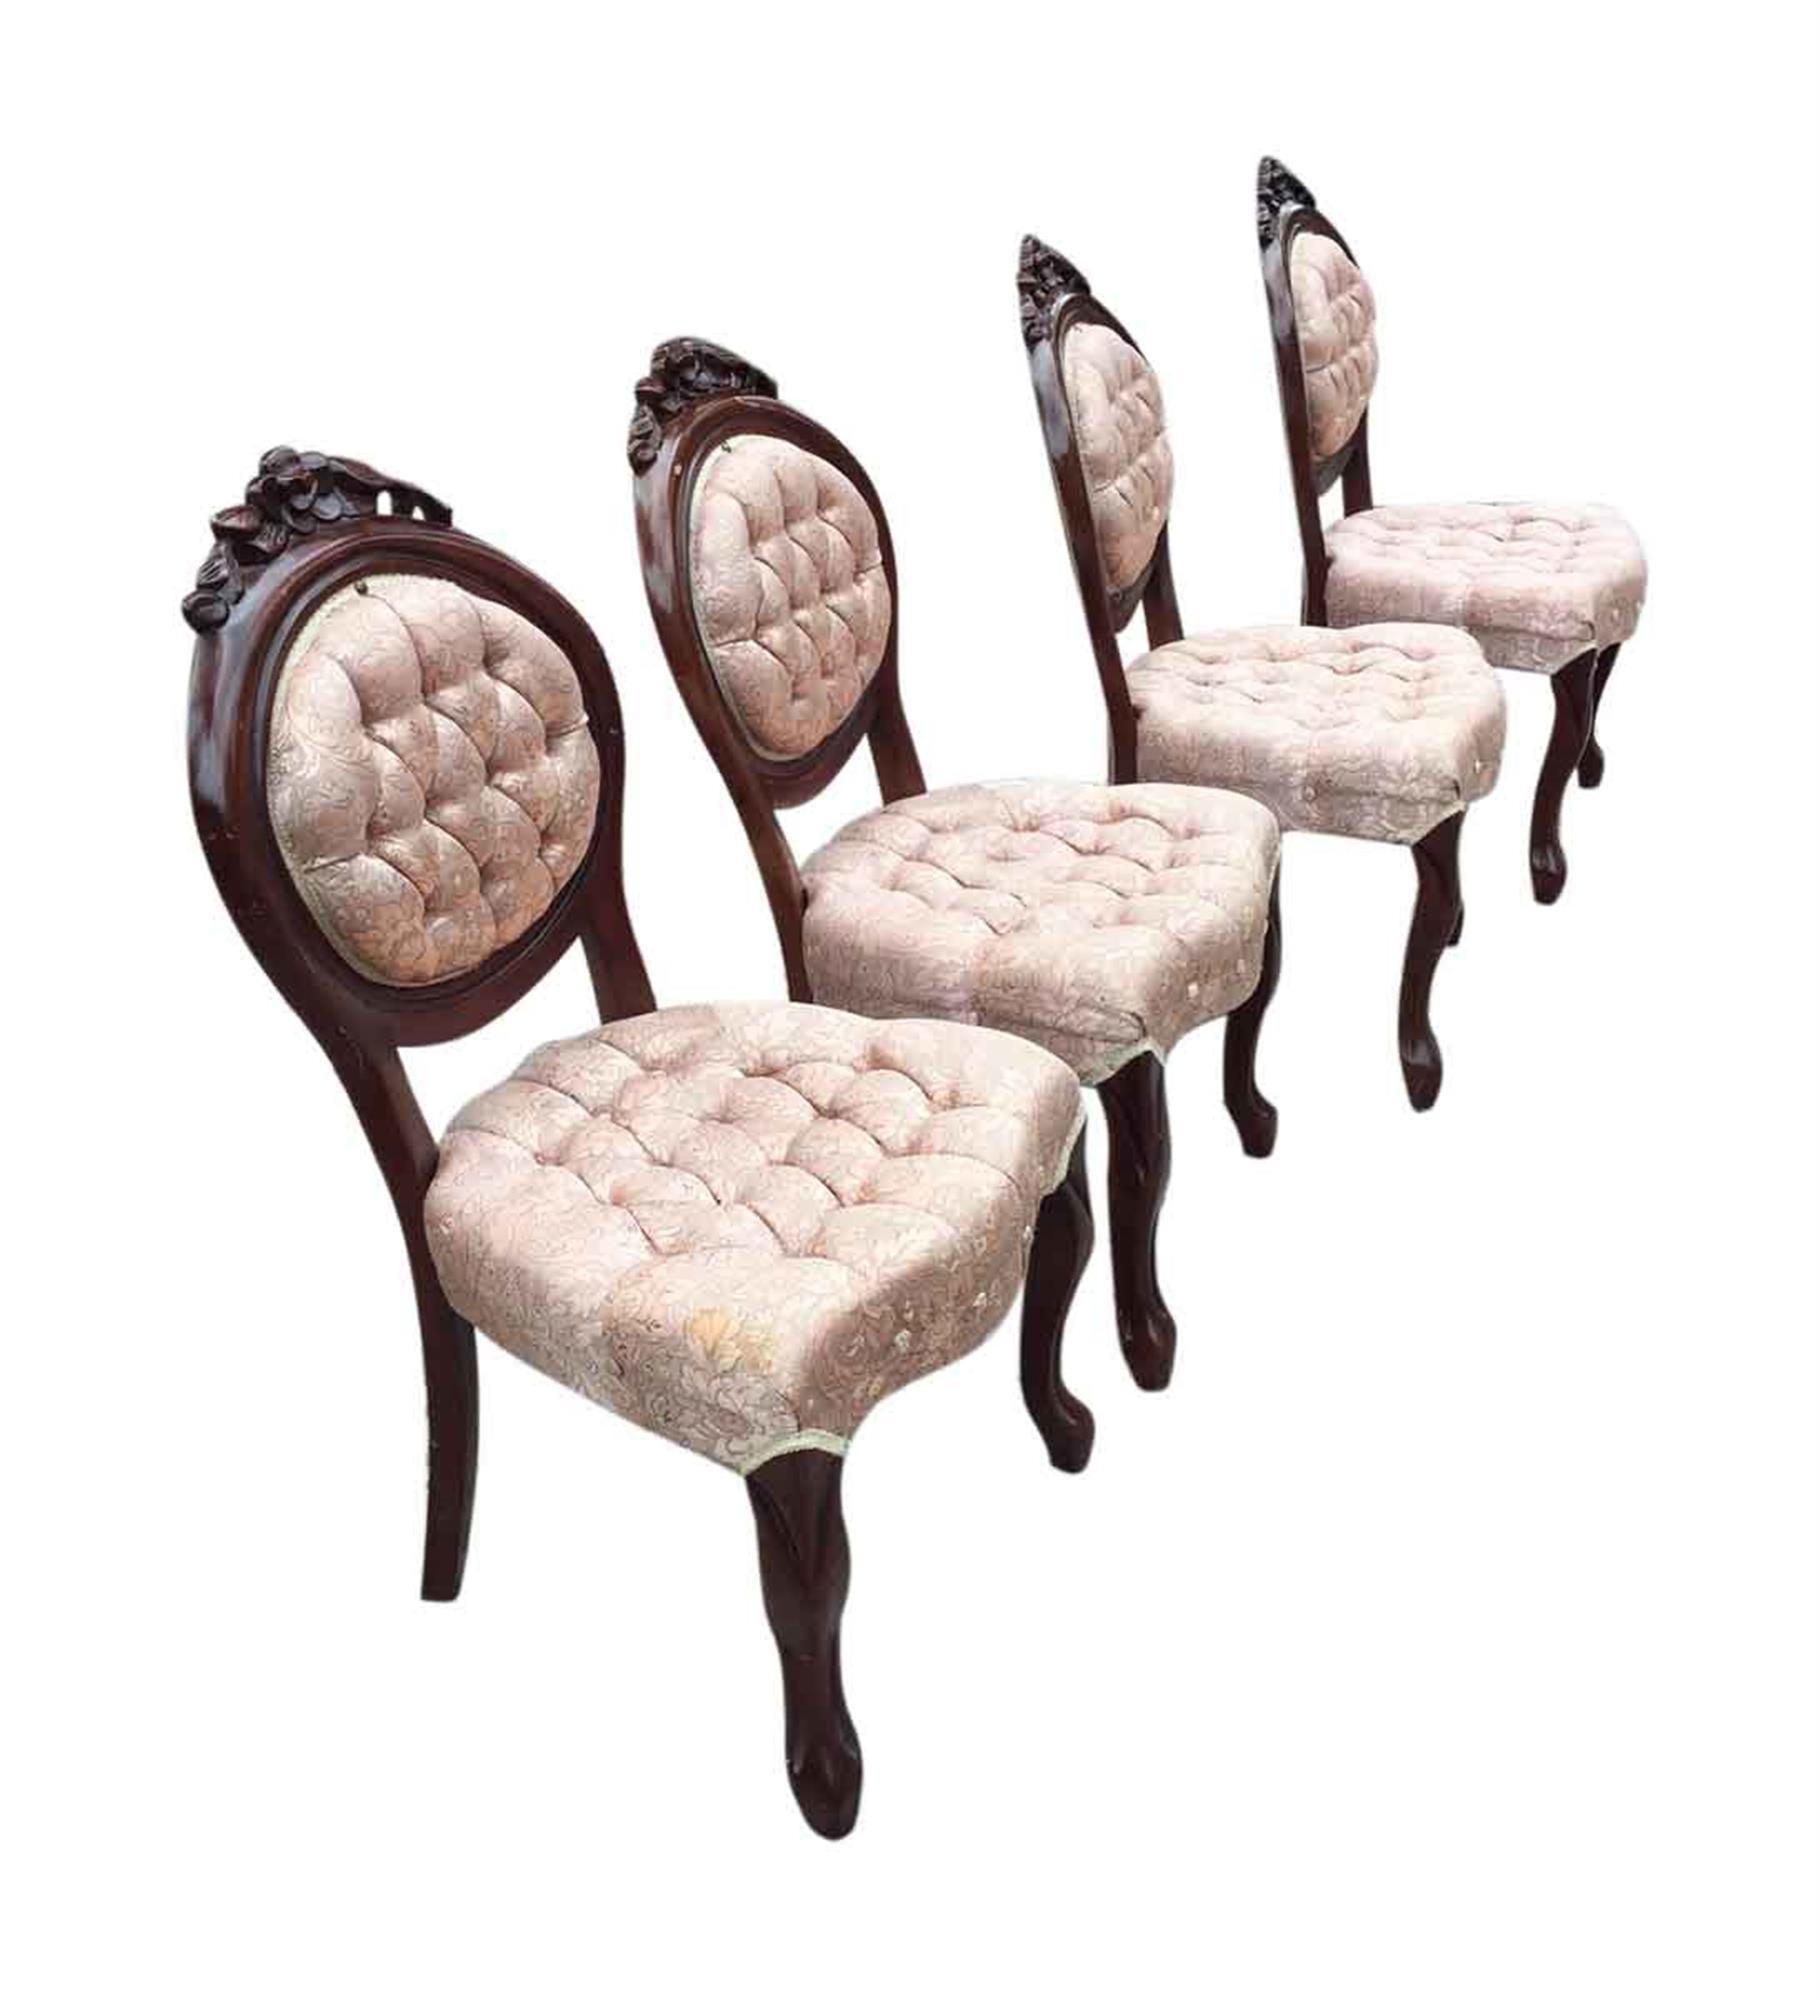 Four 1970s carved dark wood toned French dining room chairs with tufted pink floral silk upholstery, brass rivets, and floral detail in the frame. Priced as a set. This can be seen at our 2420 Broadway location on the upper west side in Manhattan.